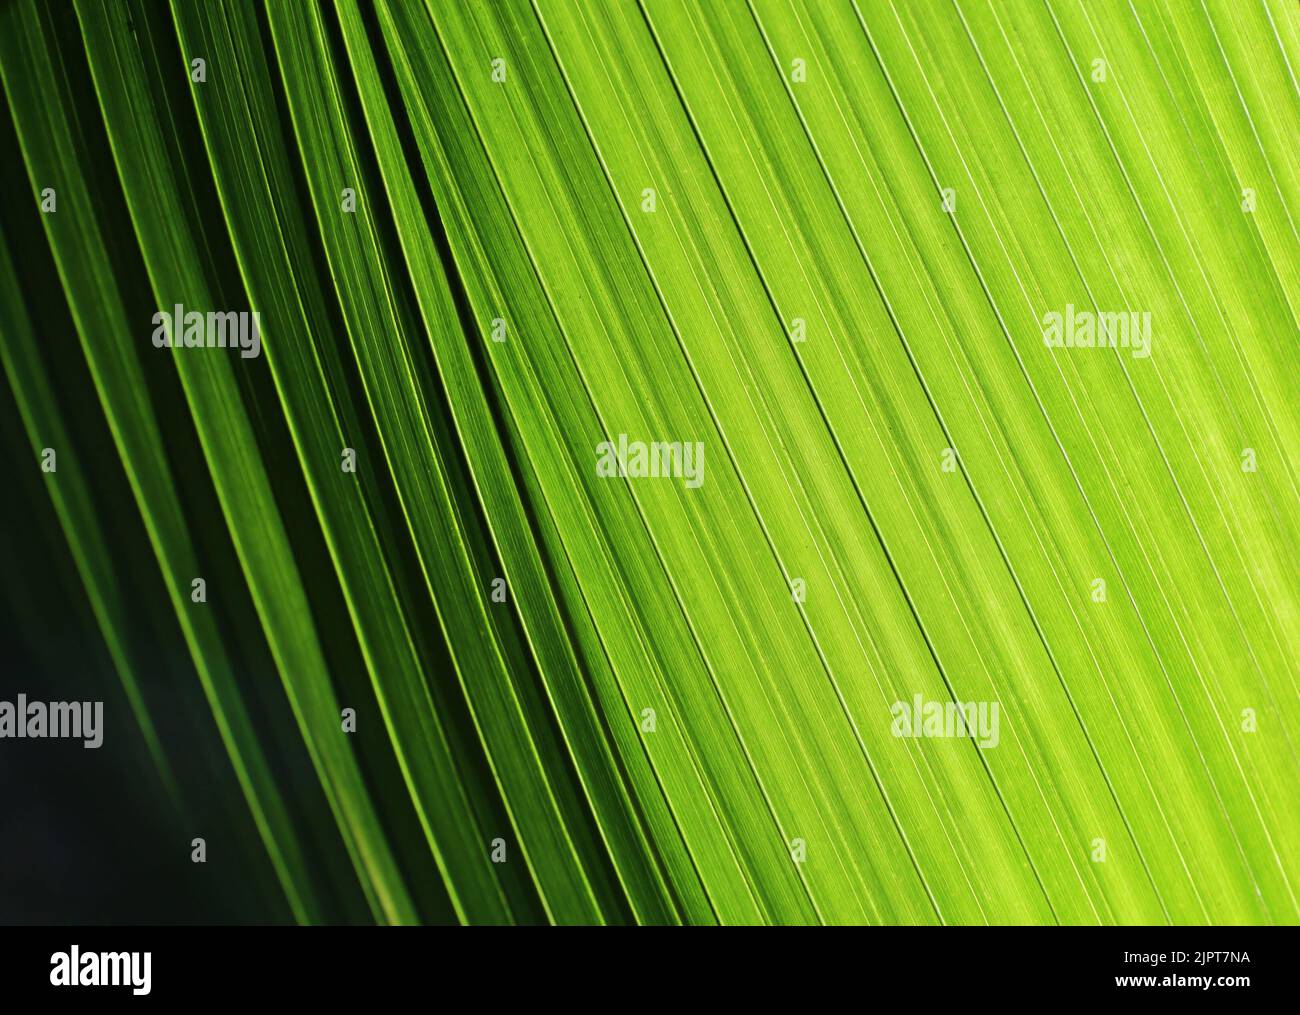 Palm leaf with diagonal lines from light to dark Stock Photo